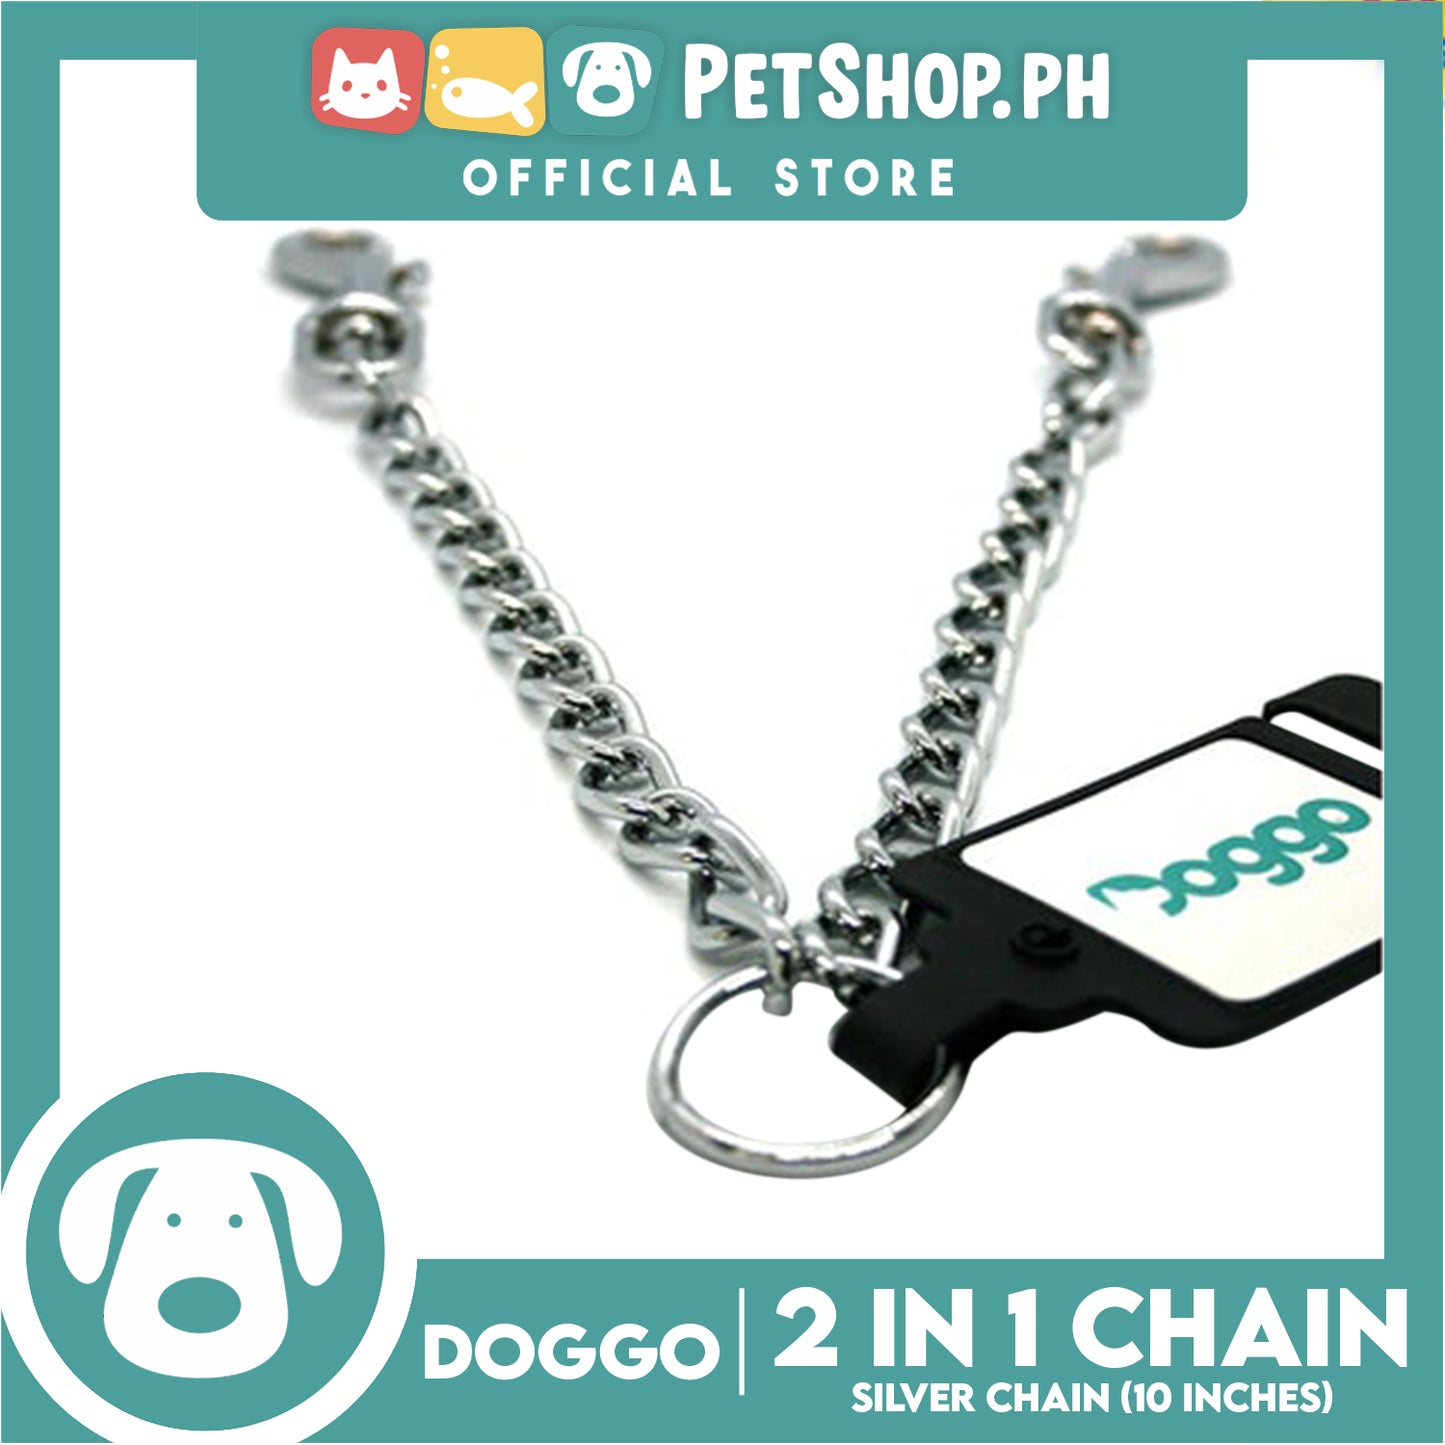 Doggo 2 in 1 Chain Heavy Duty Silver Metal Chain for Two Dogs